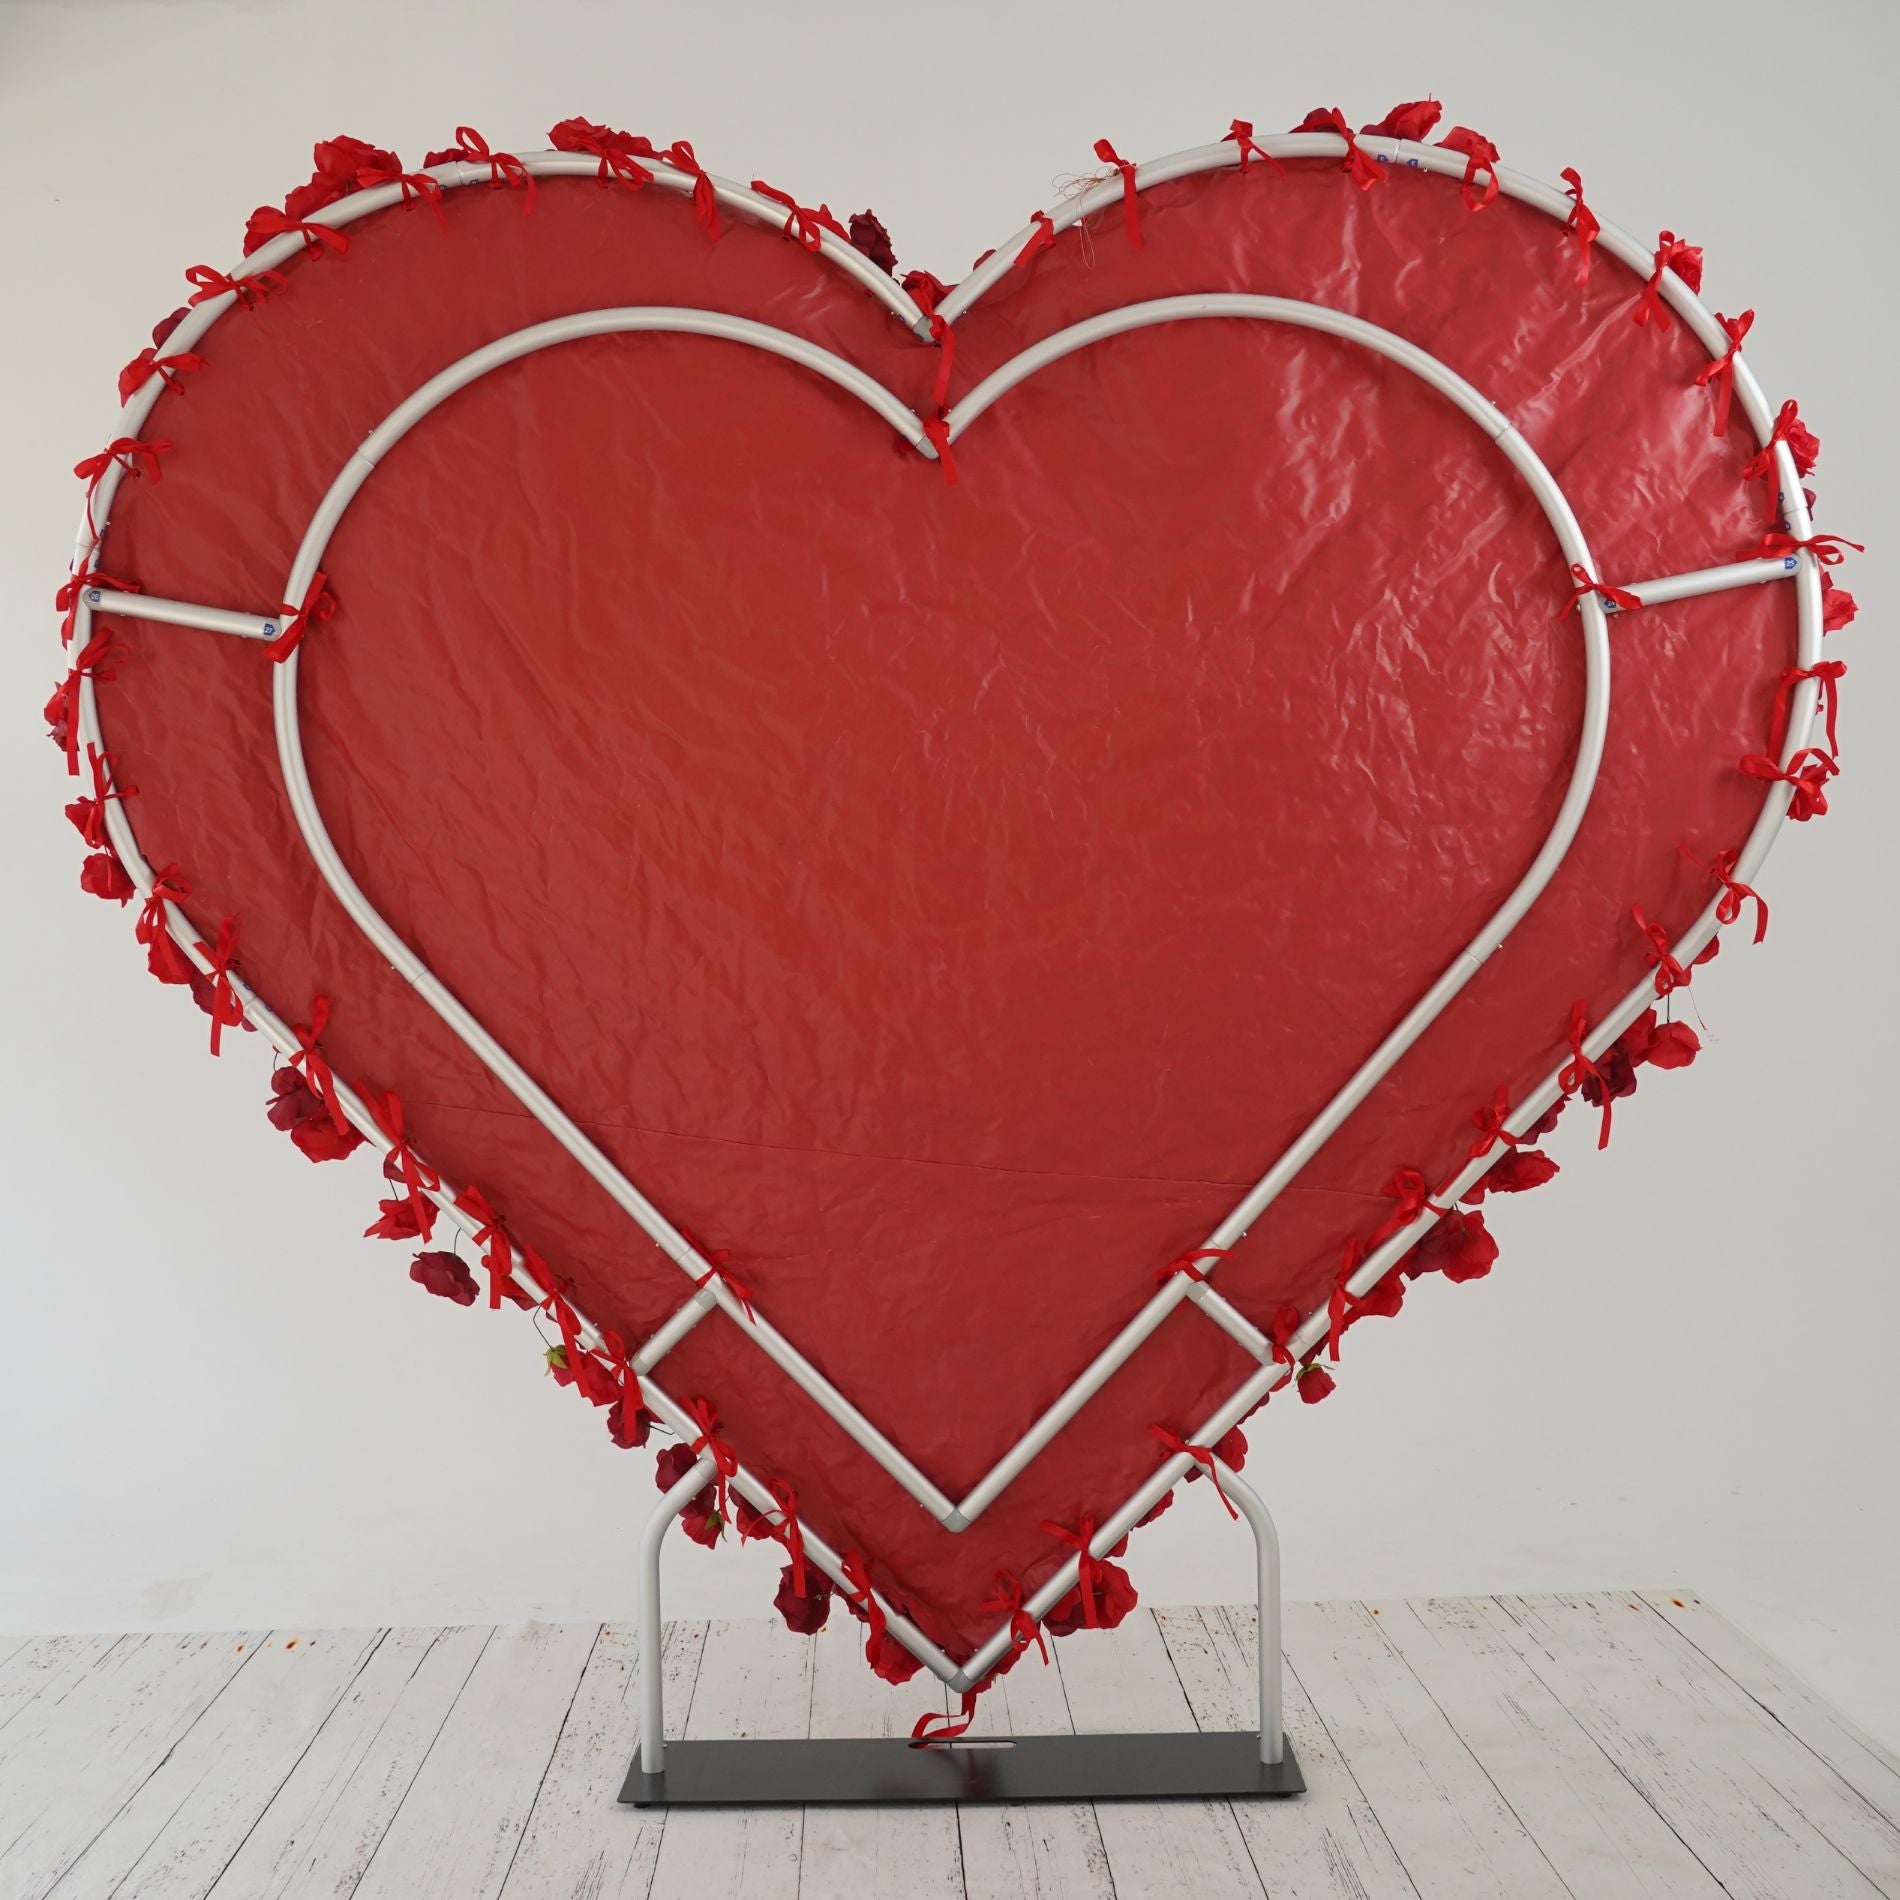 The heart shaped red rose flower wall is fixed to the shelf of the heart.